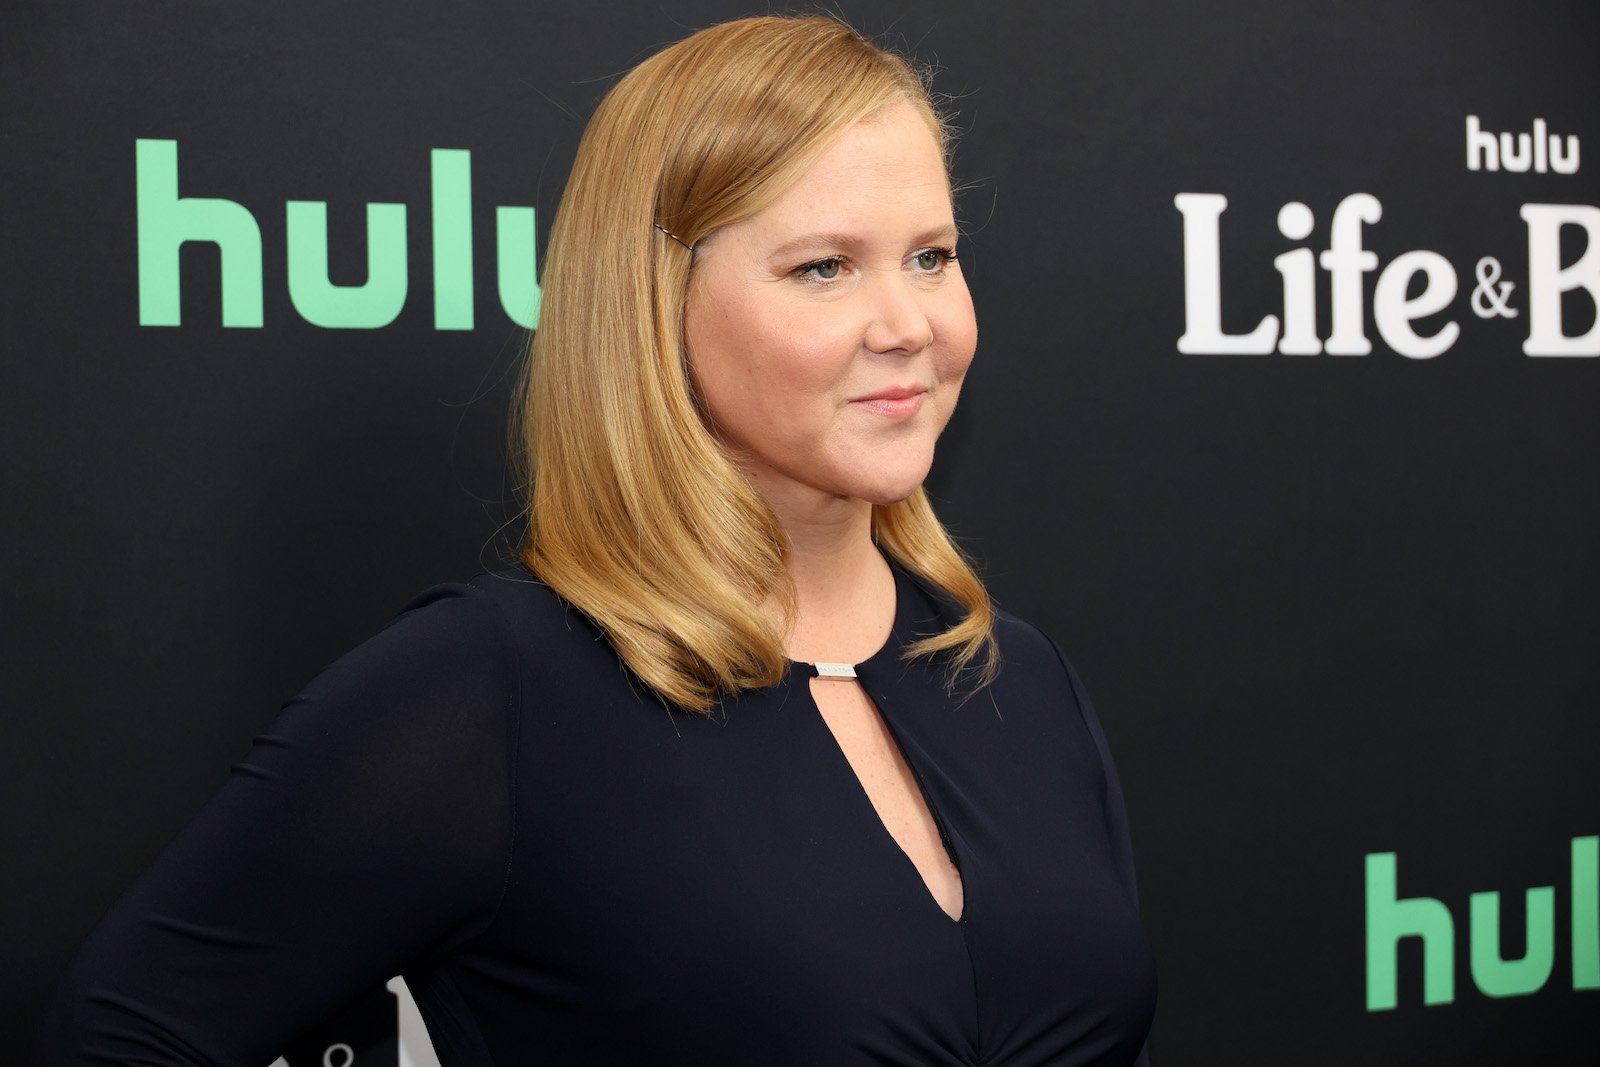 Amy Schumer attends Hulu's 'Life & Beth' New York Premiere